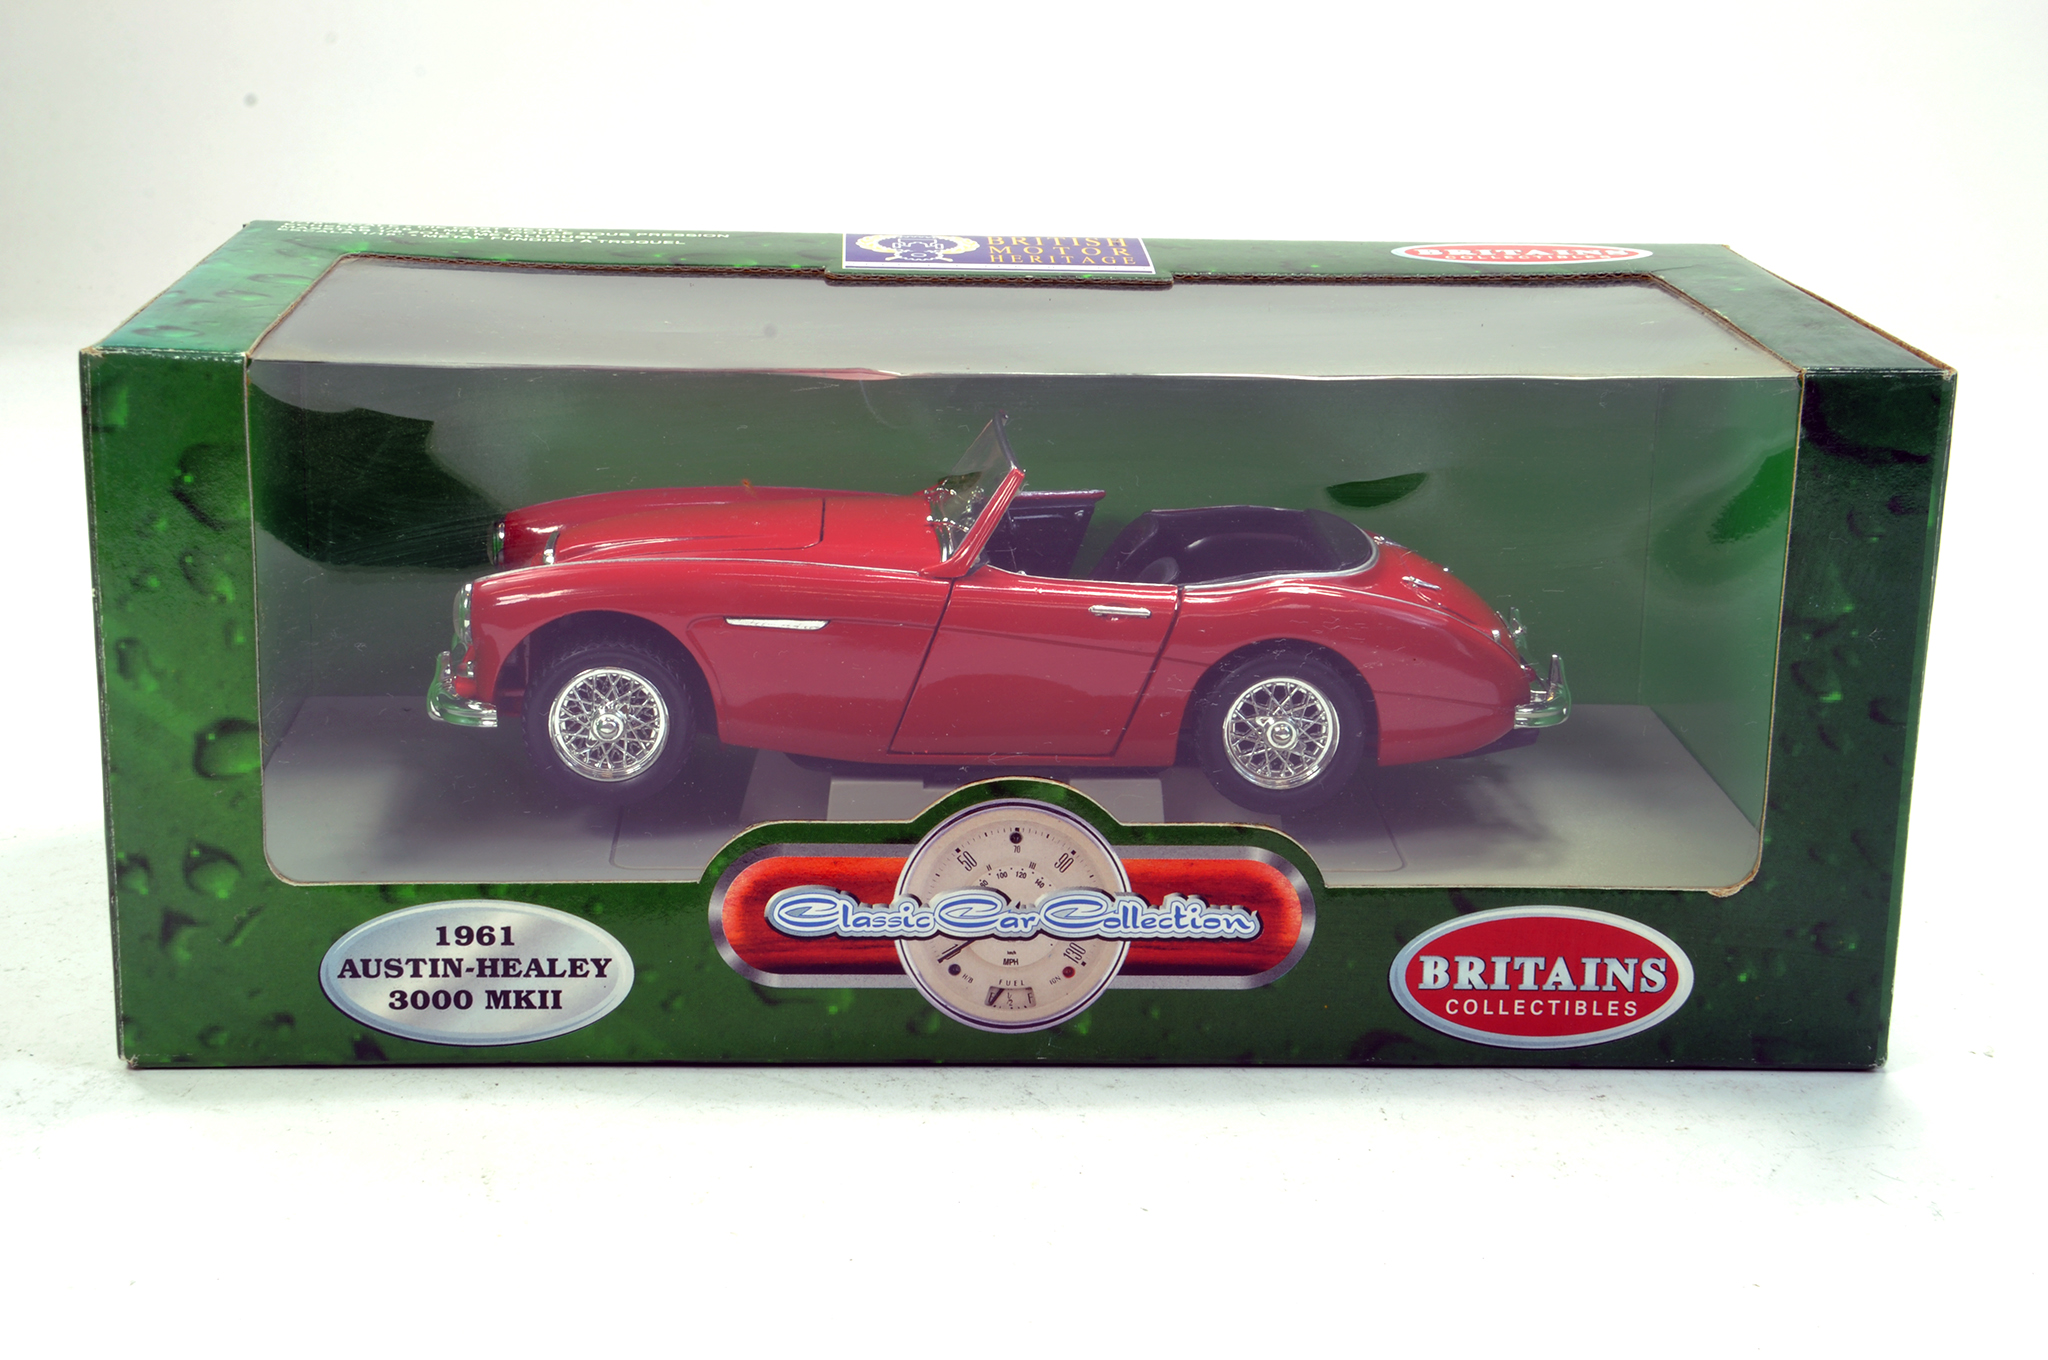 Britains 1/18 Rare Austin Healey 3000 Sports Car. Looks to be complete, excellent and with